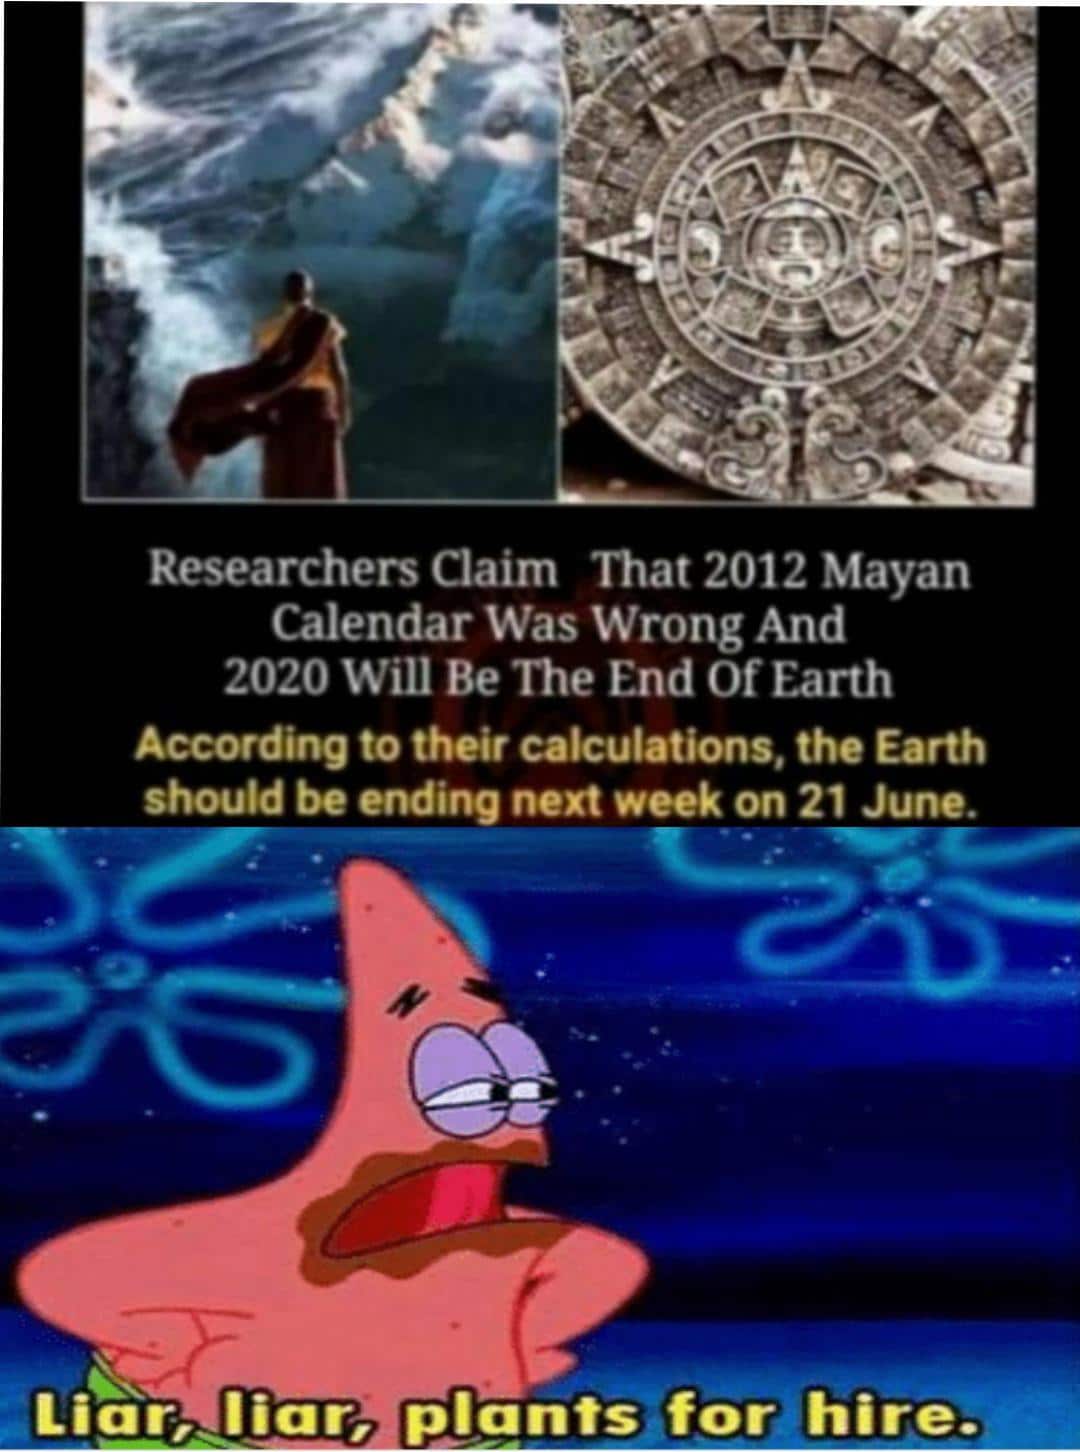 Spongebob, The Mayan, Researchers, Mayans, Mayan, December Spongebob Memes Spongebob, The Mayan, Researchers, Mayans, Mayan, December text: Researchers Claim That 2012 Mayan Calendar Was Wrong And 2020 Will Be The End Of Earth According to their calculations, the Earth should be ending next week on 21 June. Liar, liar, p*antsefor hire. 